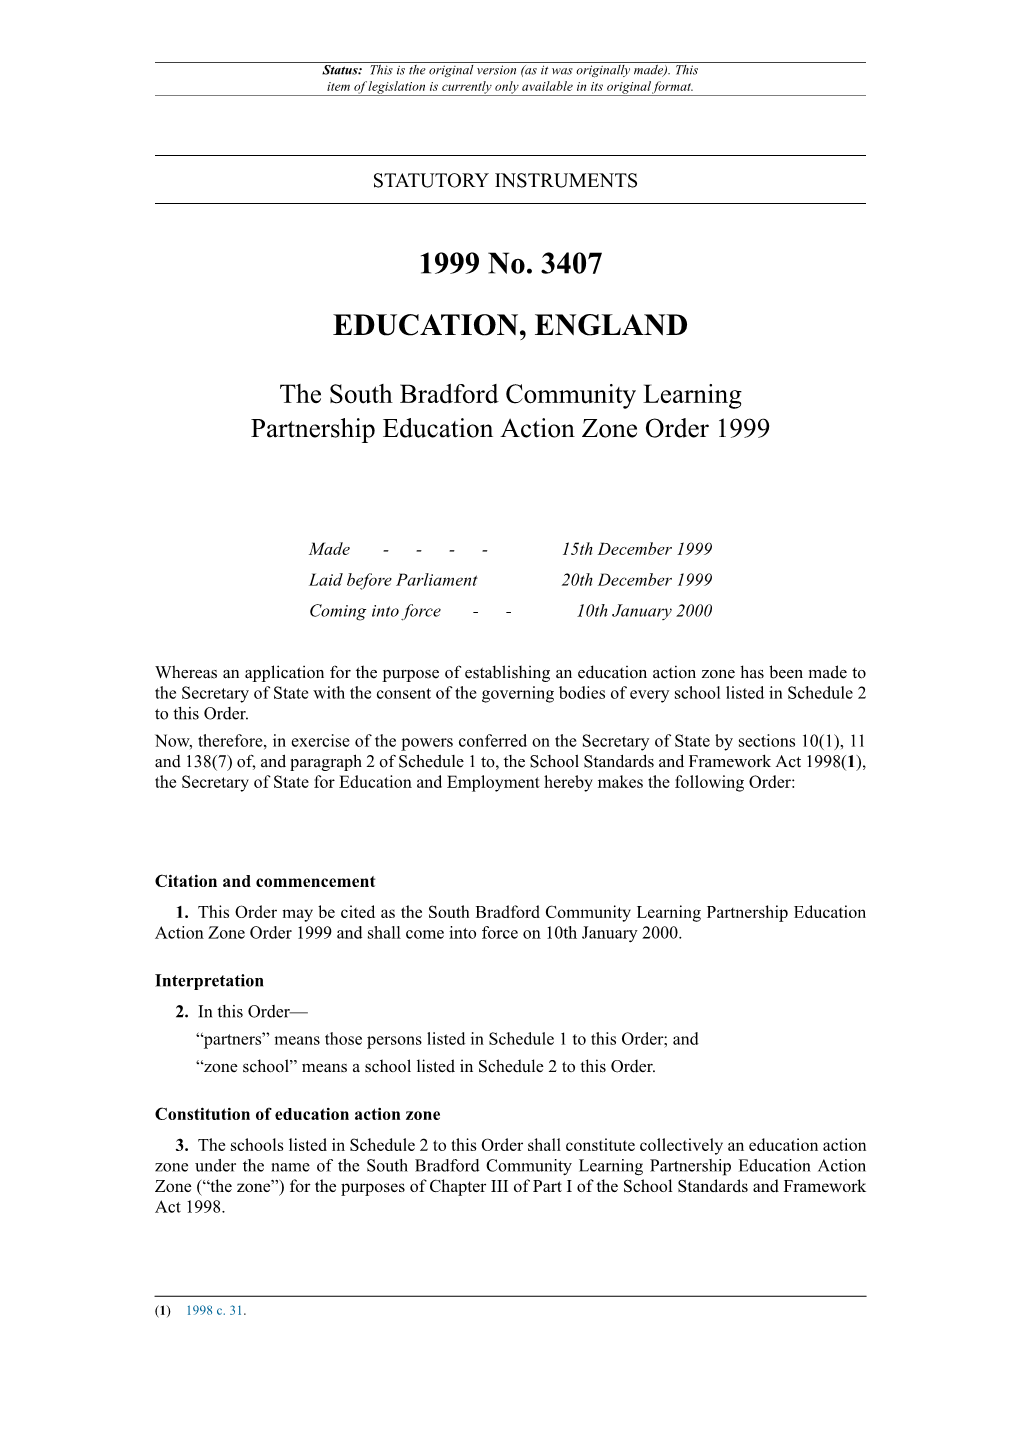 The South Bradford Community Learning Partnership Education Action Zone Order 1999